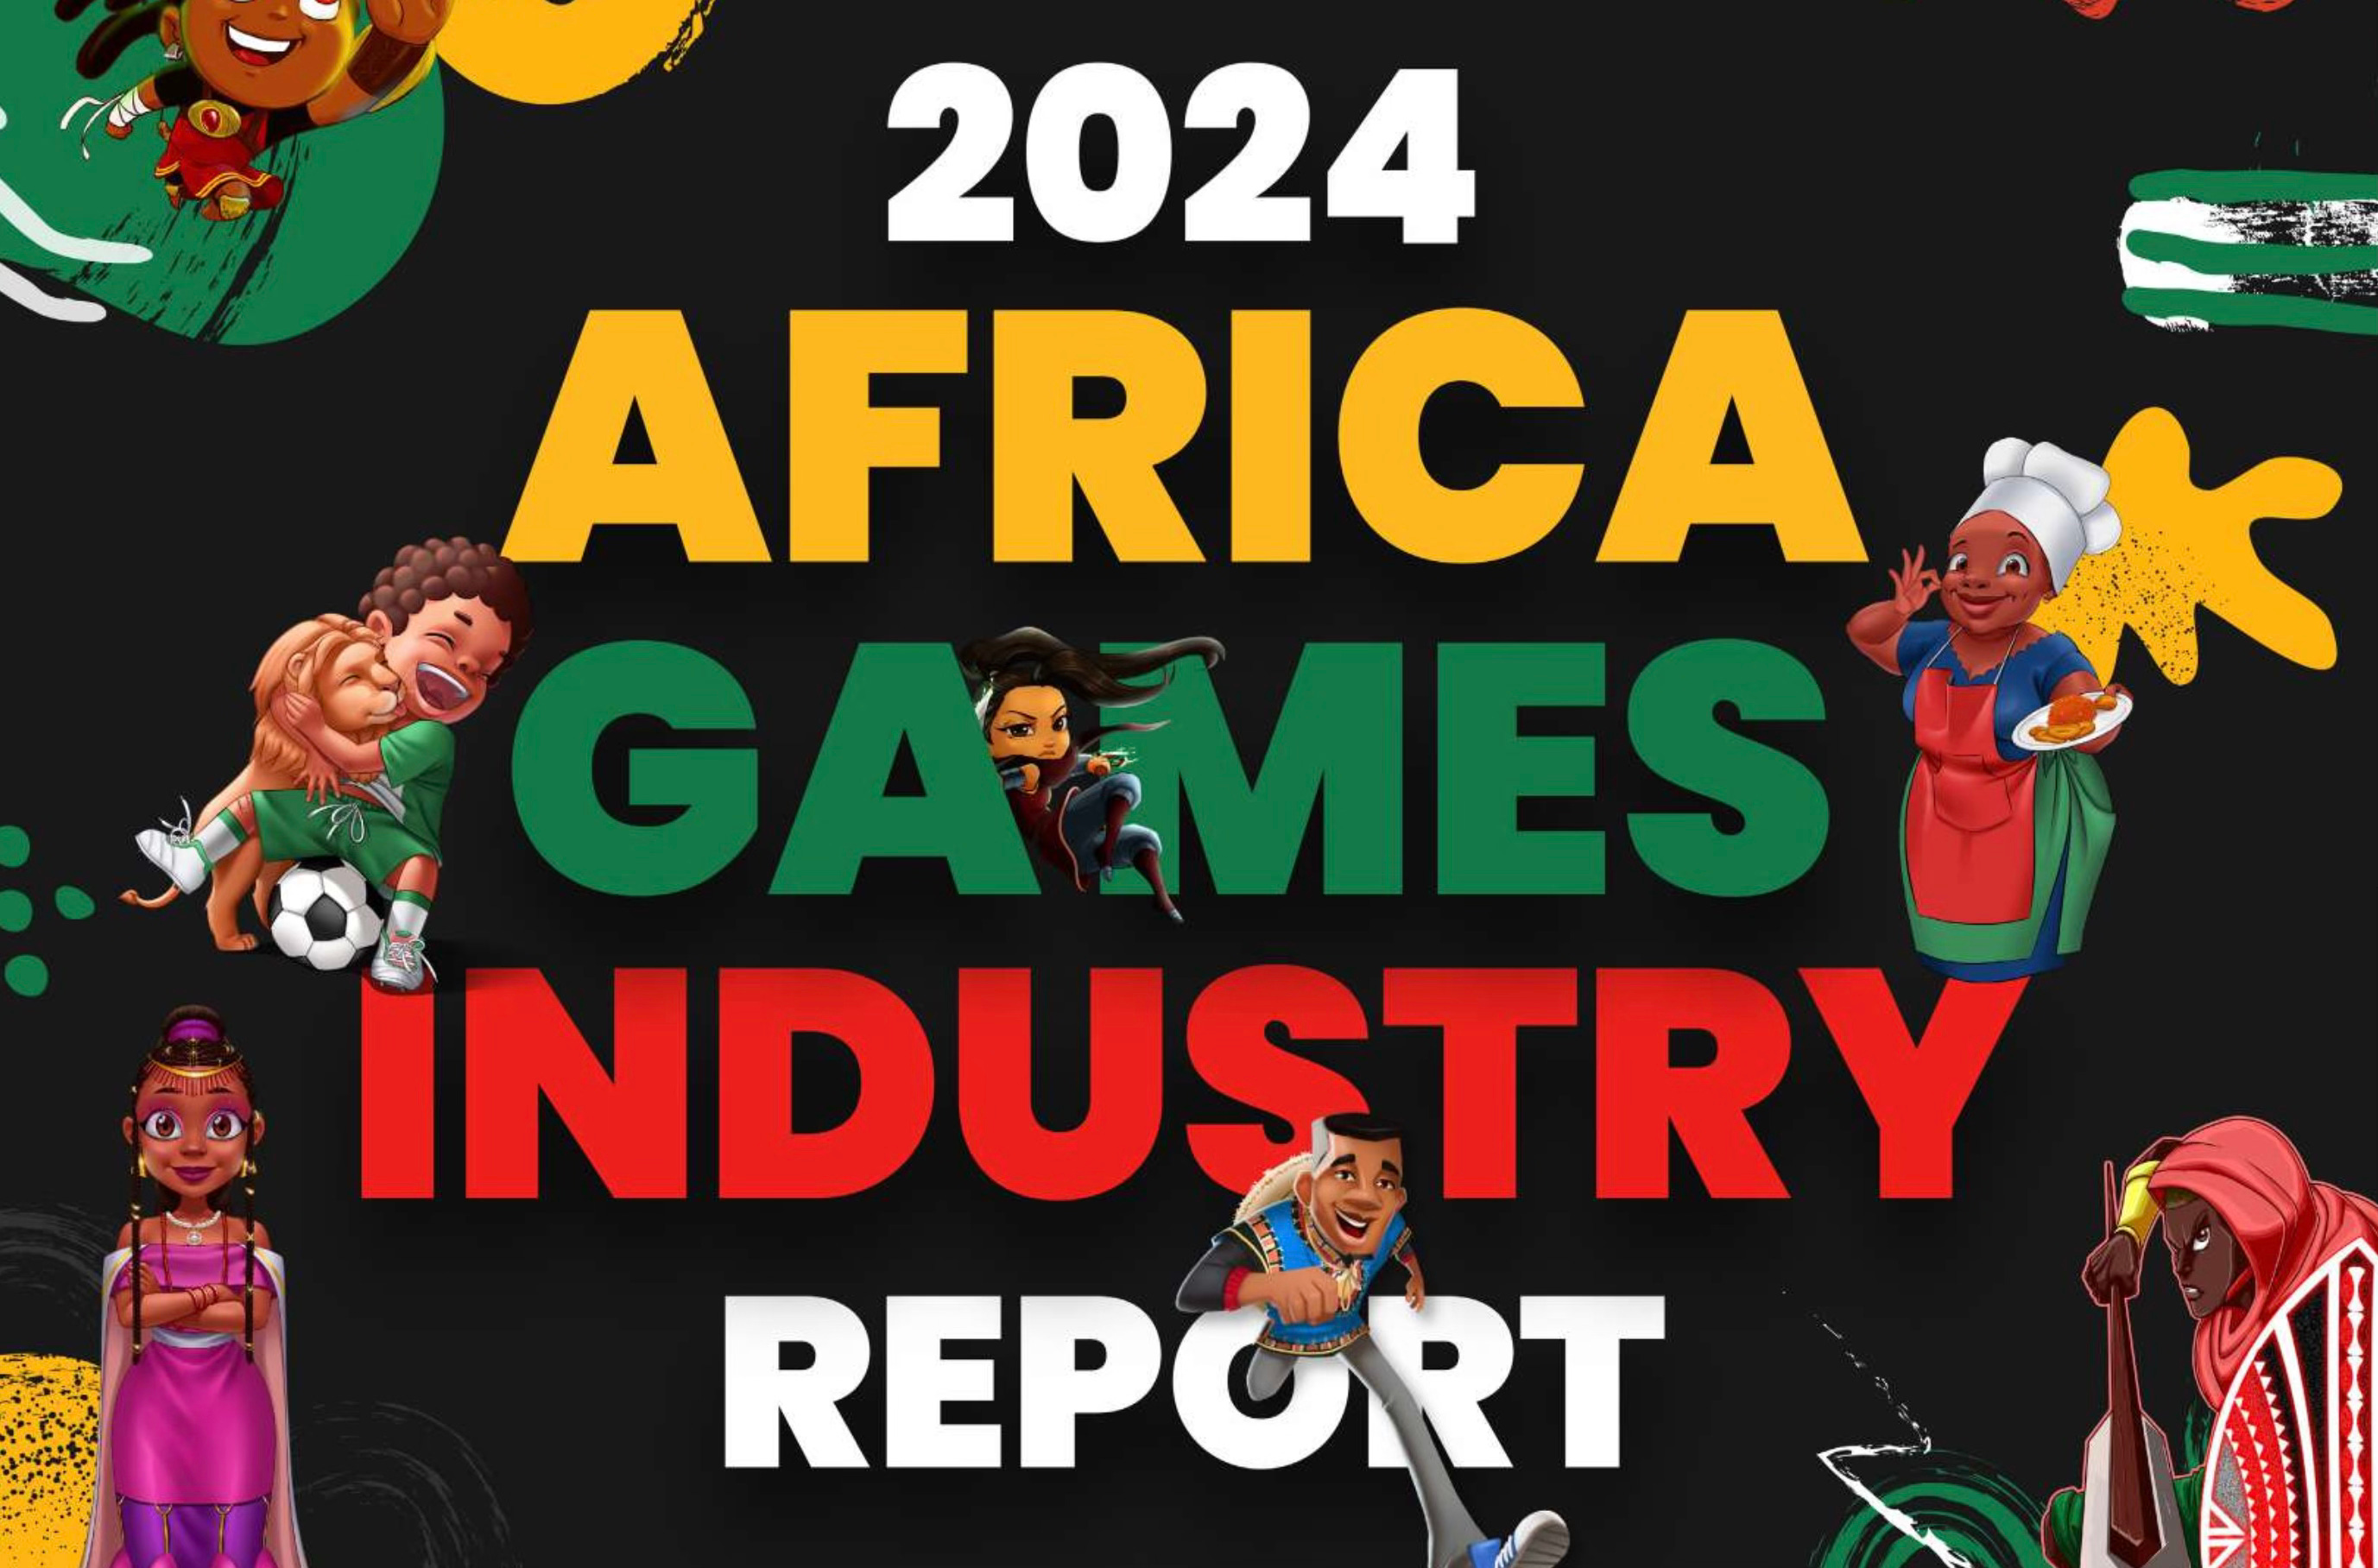 How Much Can You Make in the Gaming Industry in 2024?